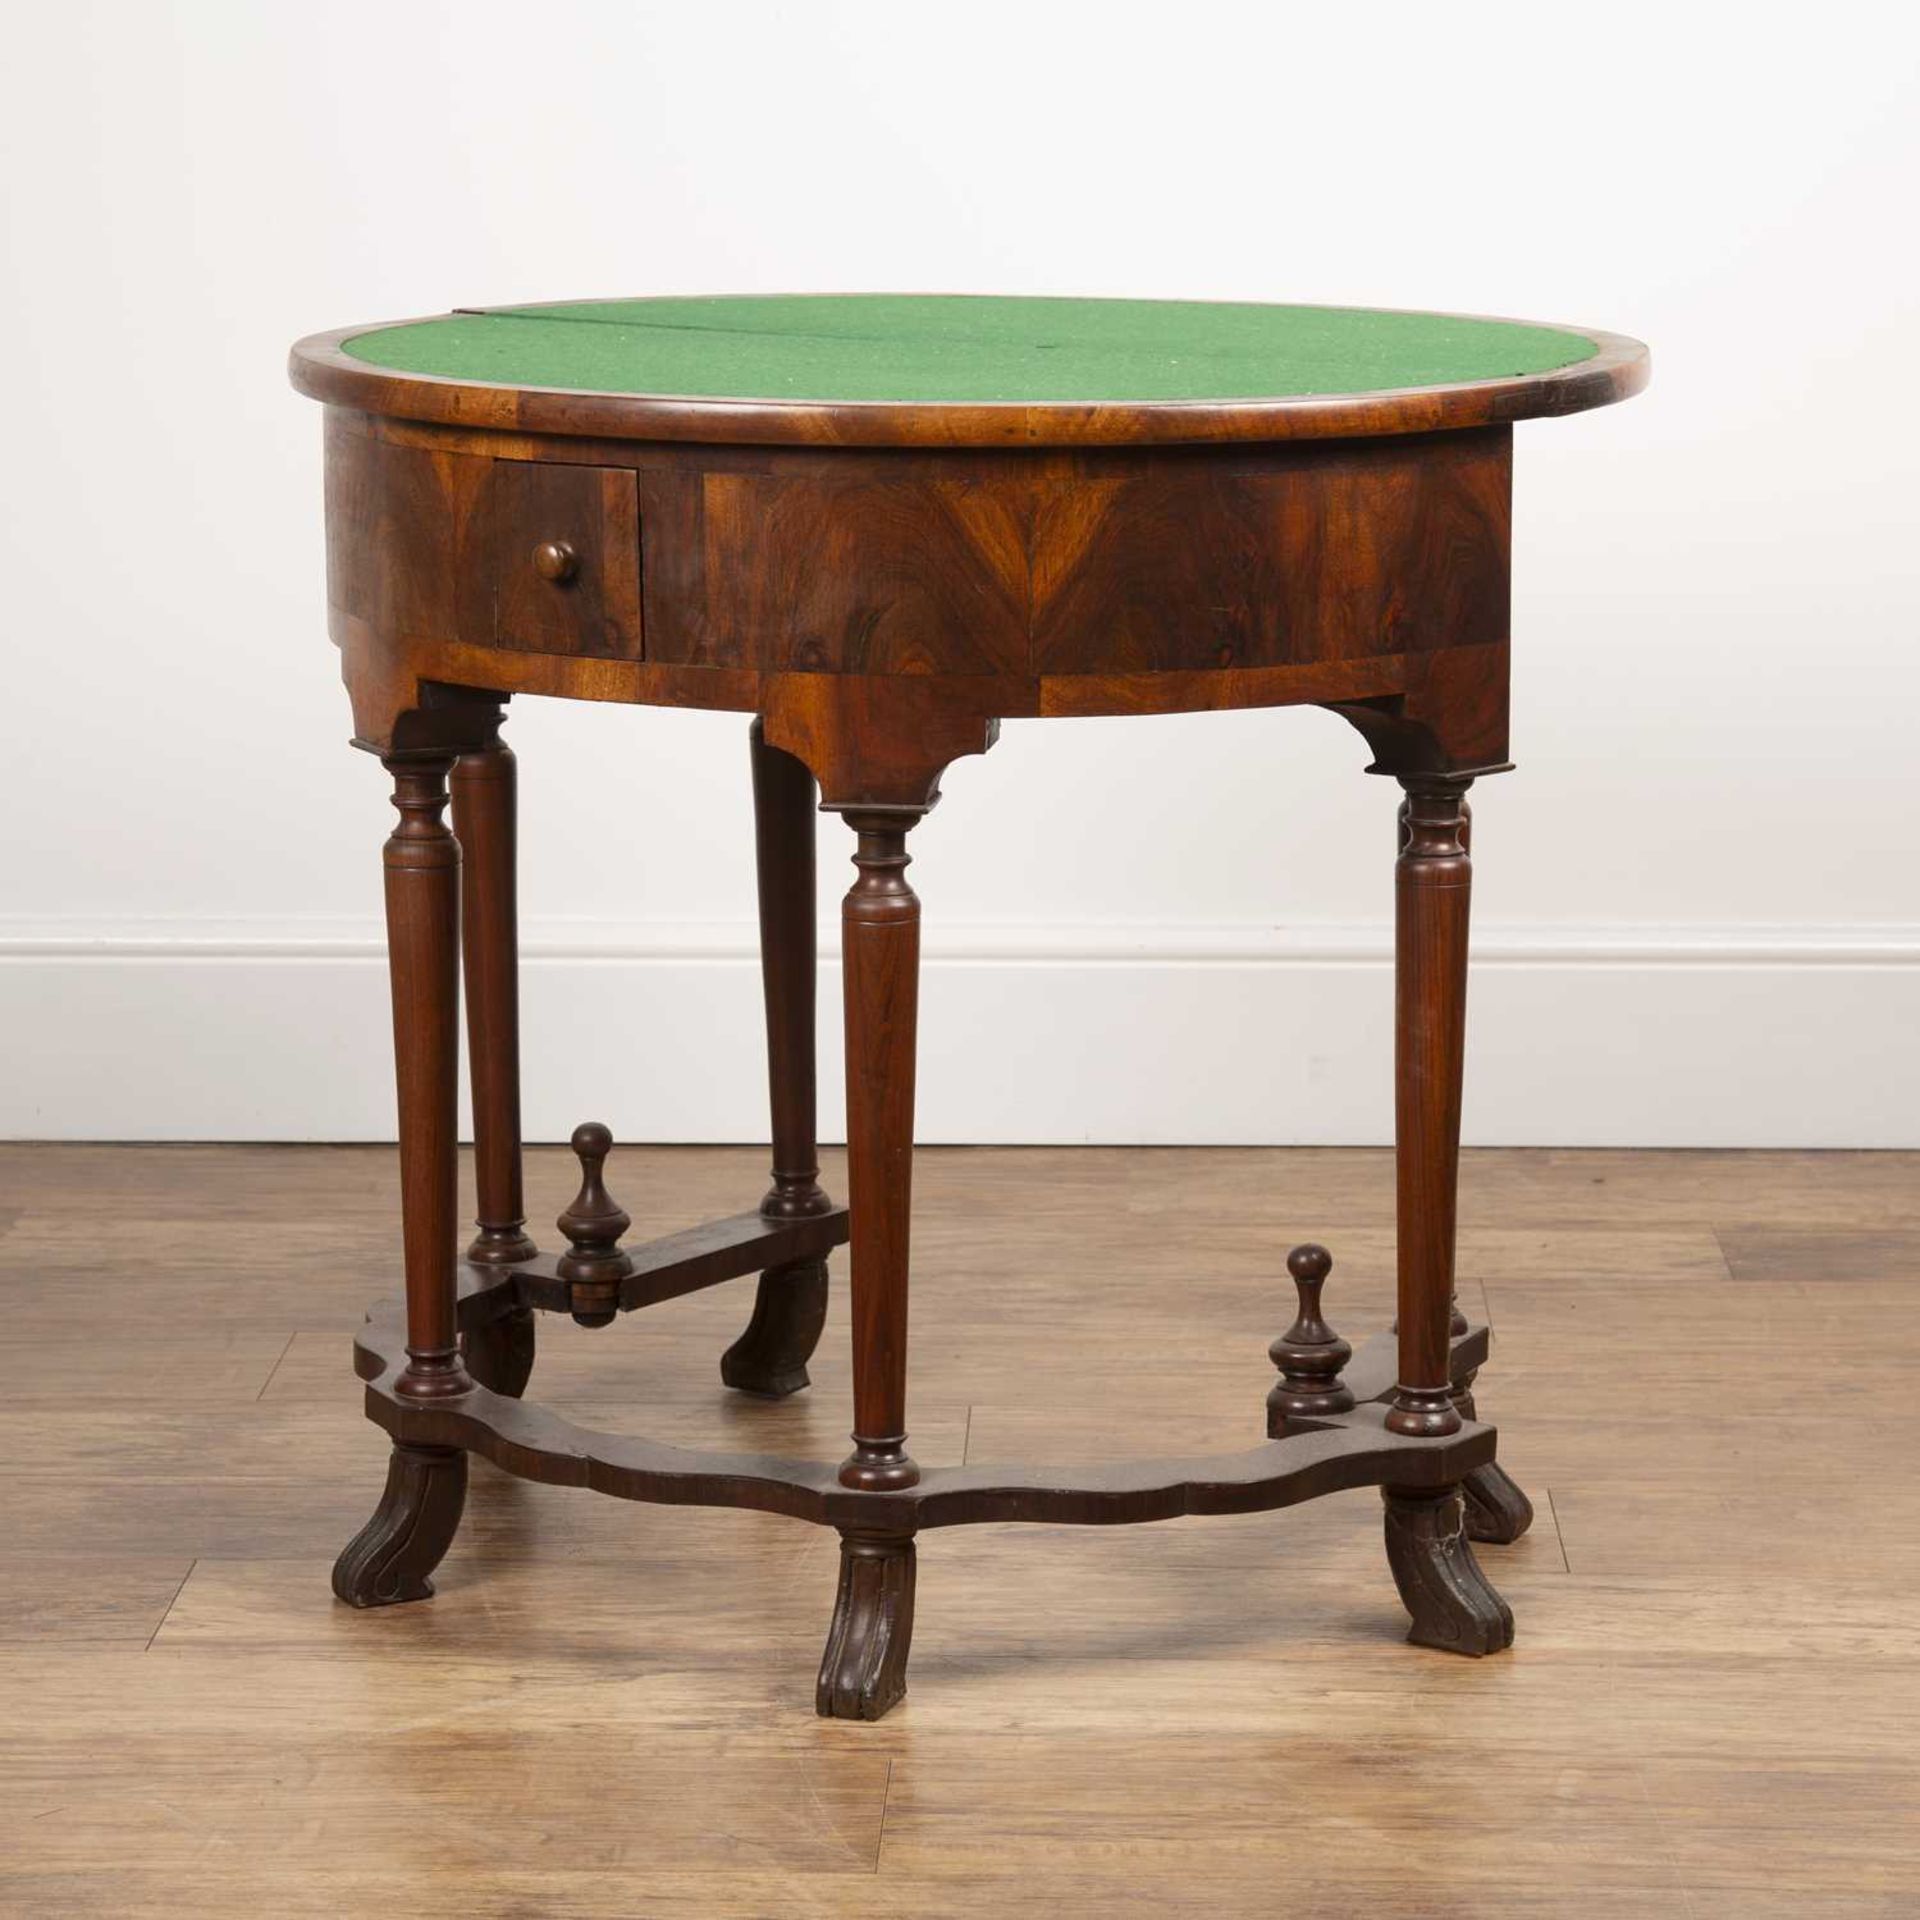 Quarter veneered walnut demi-lune card table Queen Anne style with inset baize on turned support and - Image 3 of 6